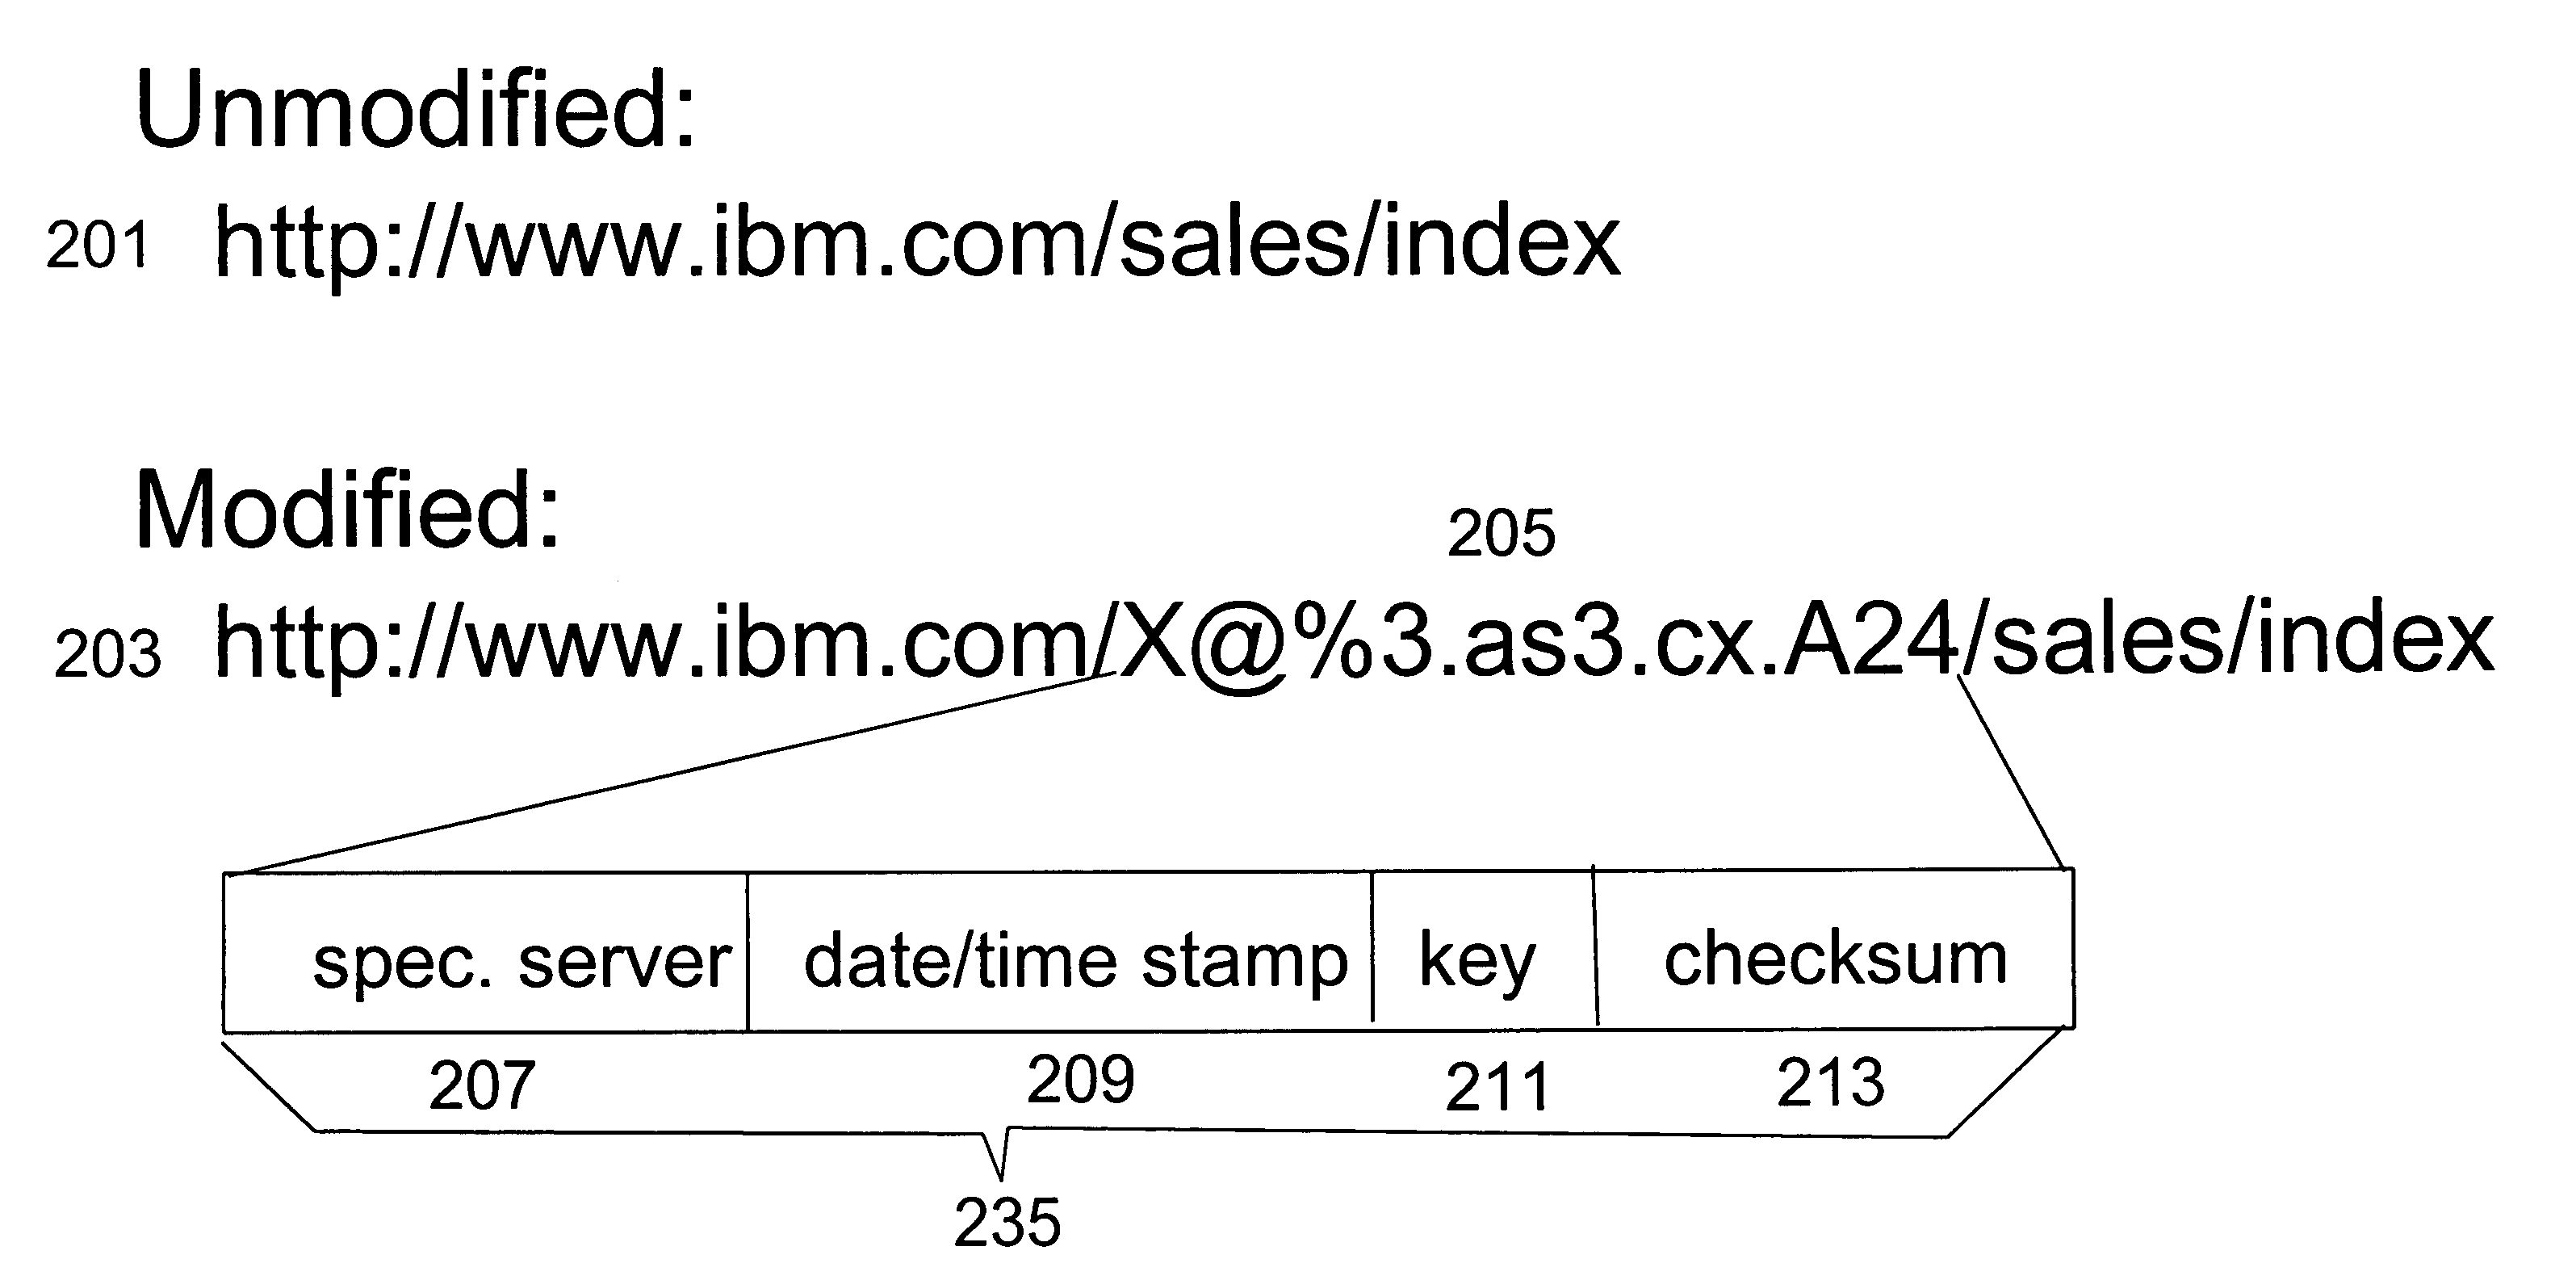 URL-based sticky routing tokens using a server-side cookie jar